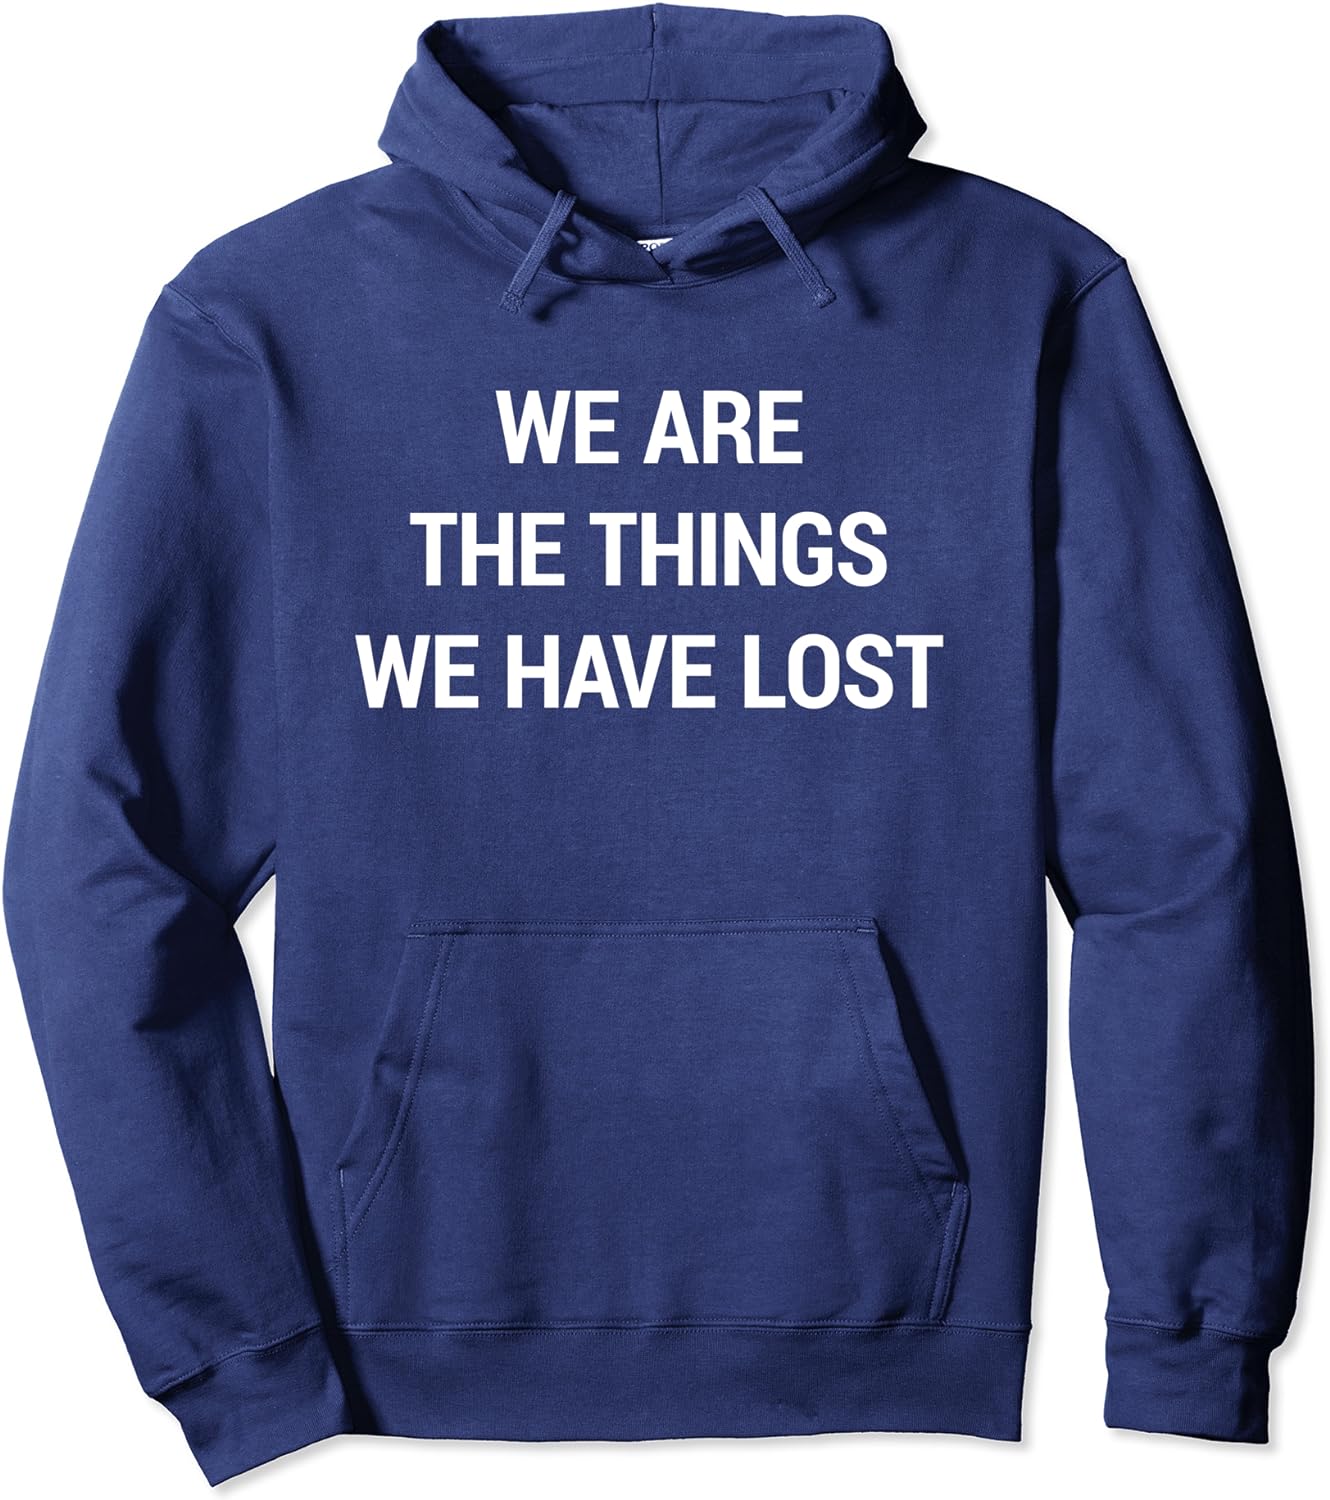 We Are The Things We Have Lost Hoodie: Reflect On Nostalgia And Memory With Thoughtful Fashion